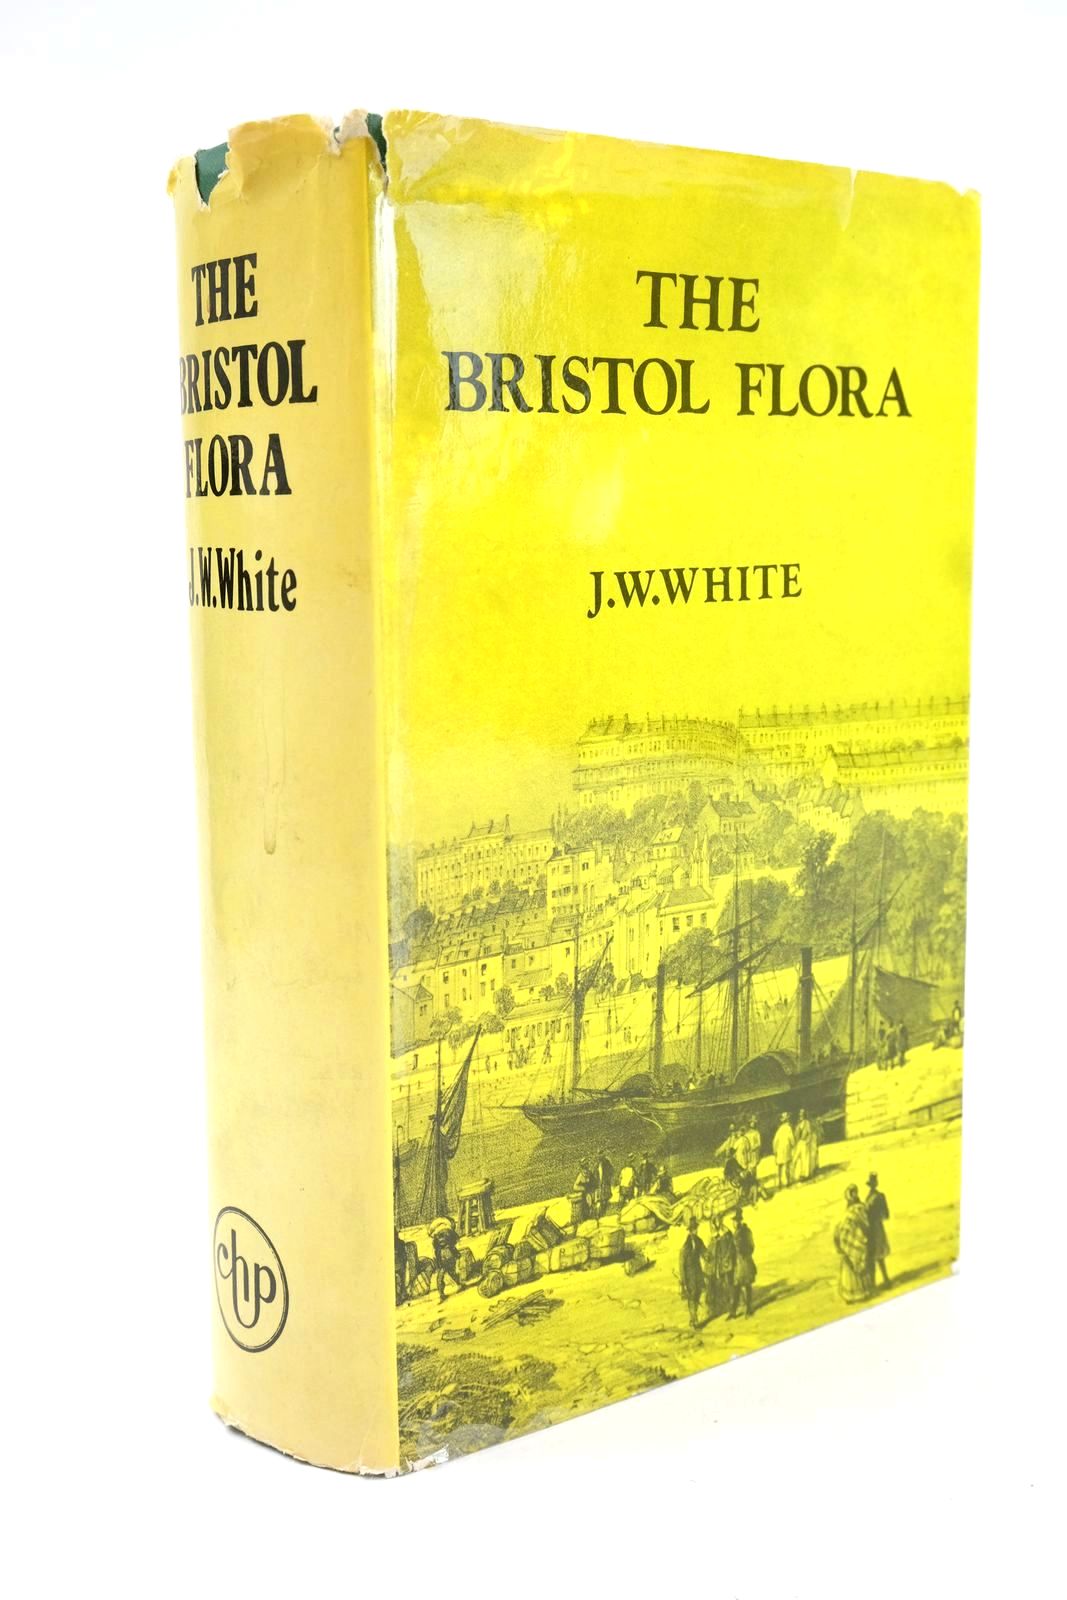 Photo of THE FLORA OF BRISTOL written by White, James Walter published by Chatford House Press Ltd. (STOCK CODE: 1324730)  for sale by Stella & Rose's Books